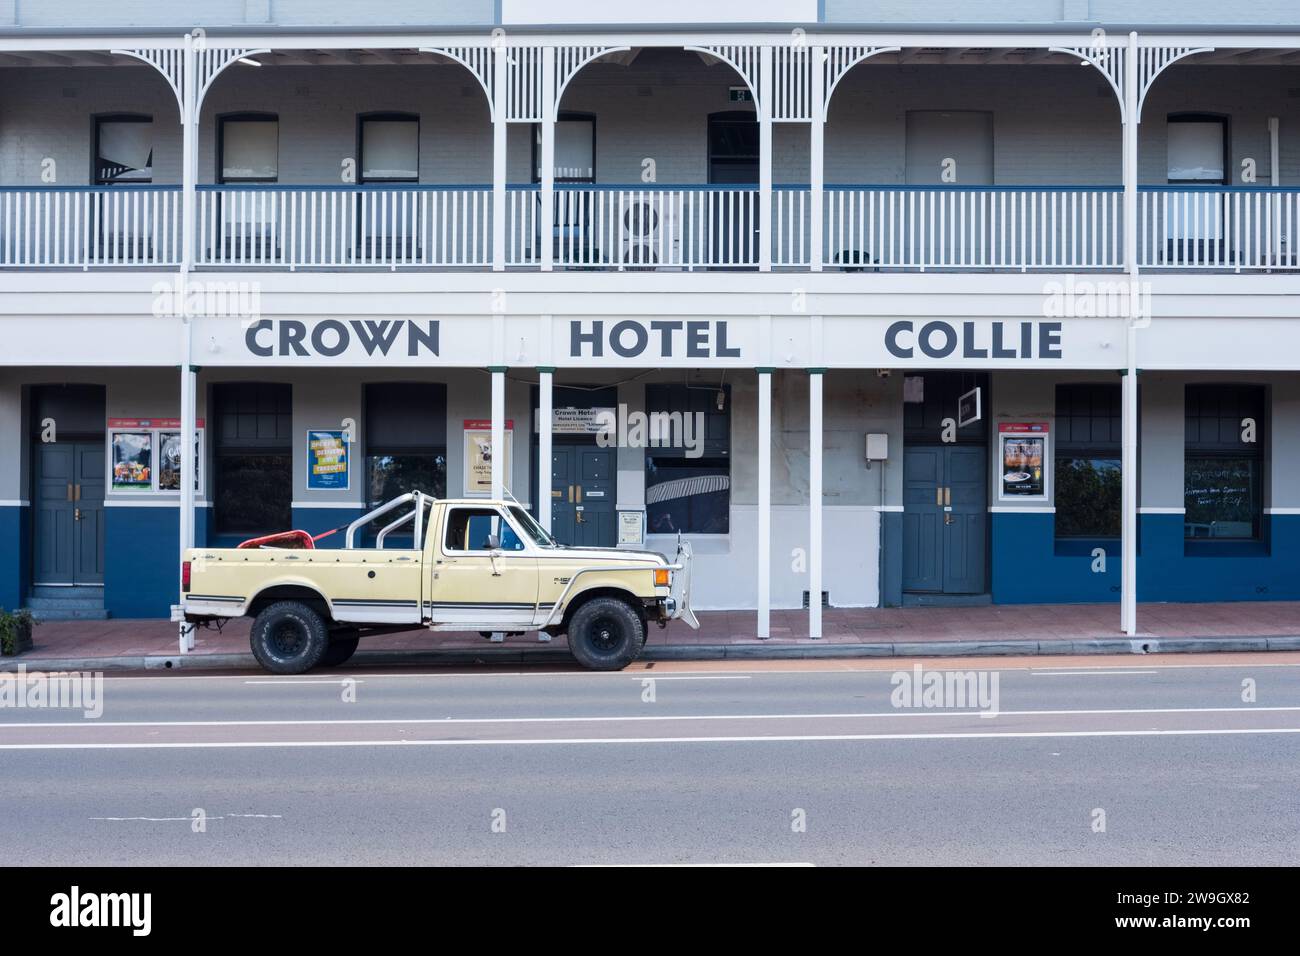 The Crown Hotel, located on the main street of Collie, a coal mining town in the south west region of Western Australia. Stock Photo